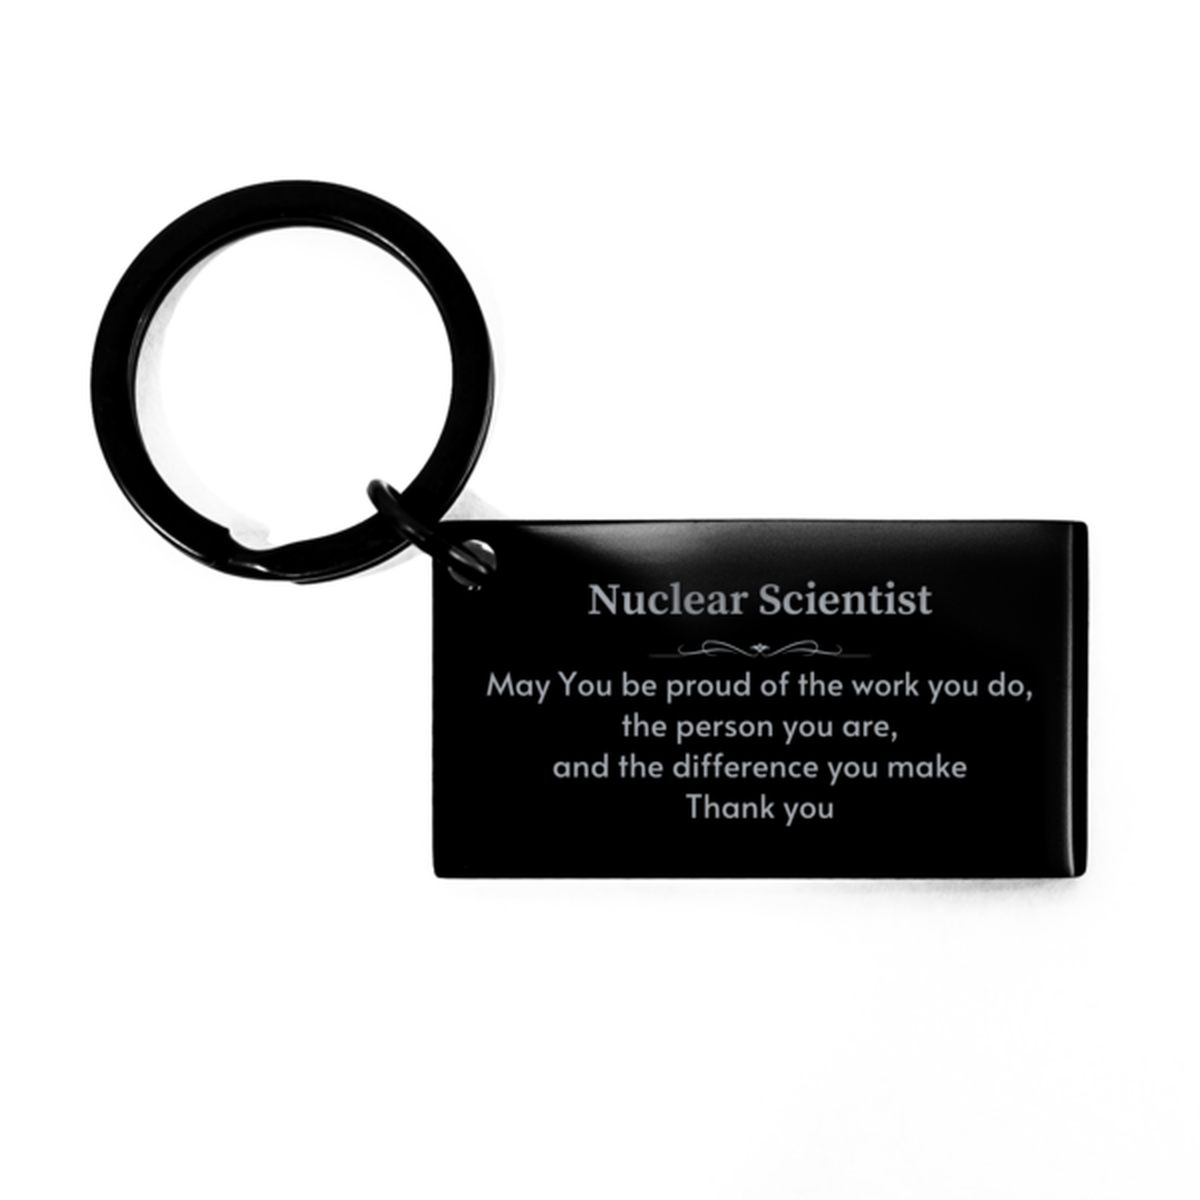 Heartwarming Keychain Retirement Coworkers Gifts for Nuclear Scientist, Performer May You be proud of the work you do, the person you are Gifts for Boss Men Women Friends